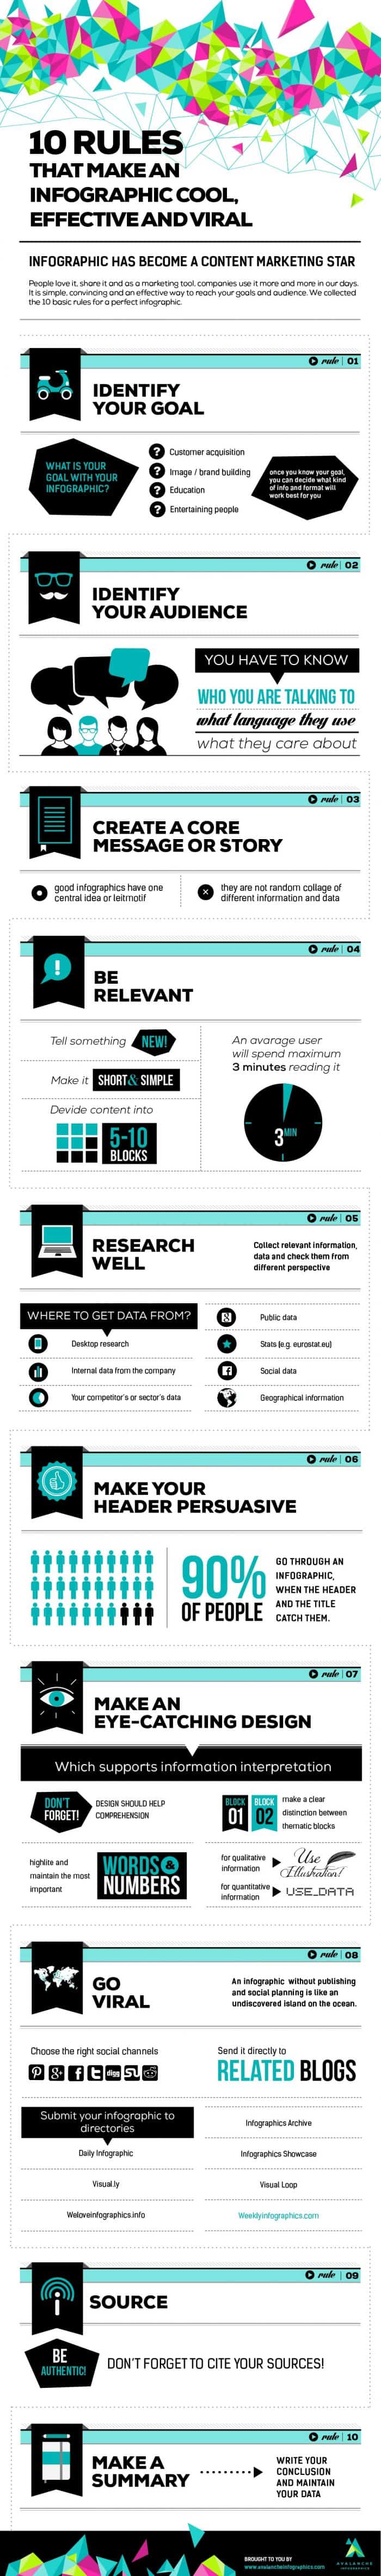 10 Rules for Making an Infographic Cool, Effective and Viral